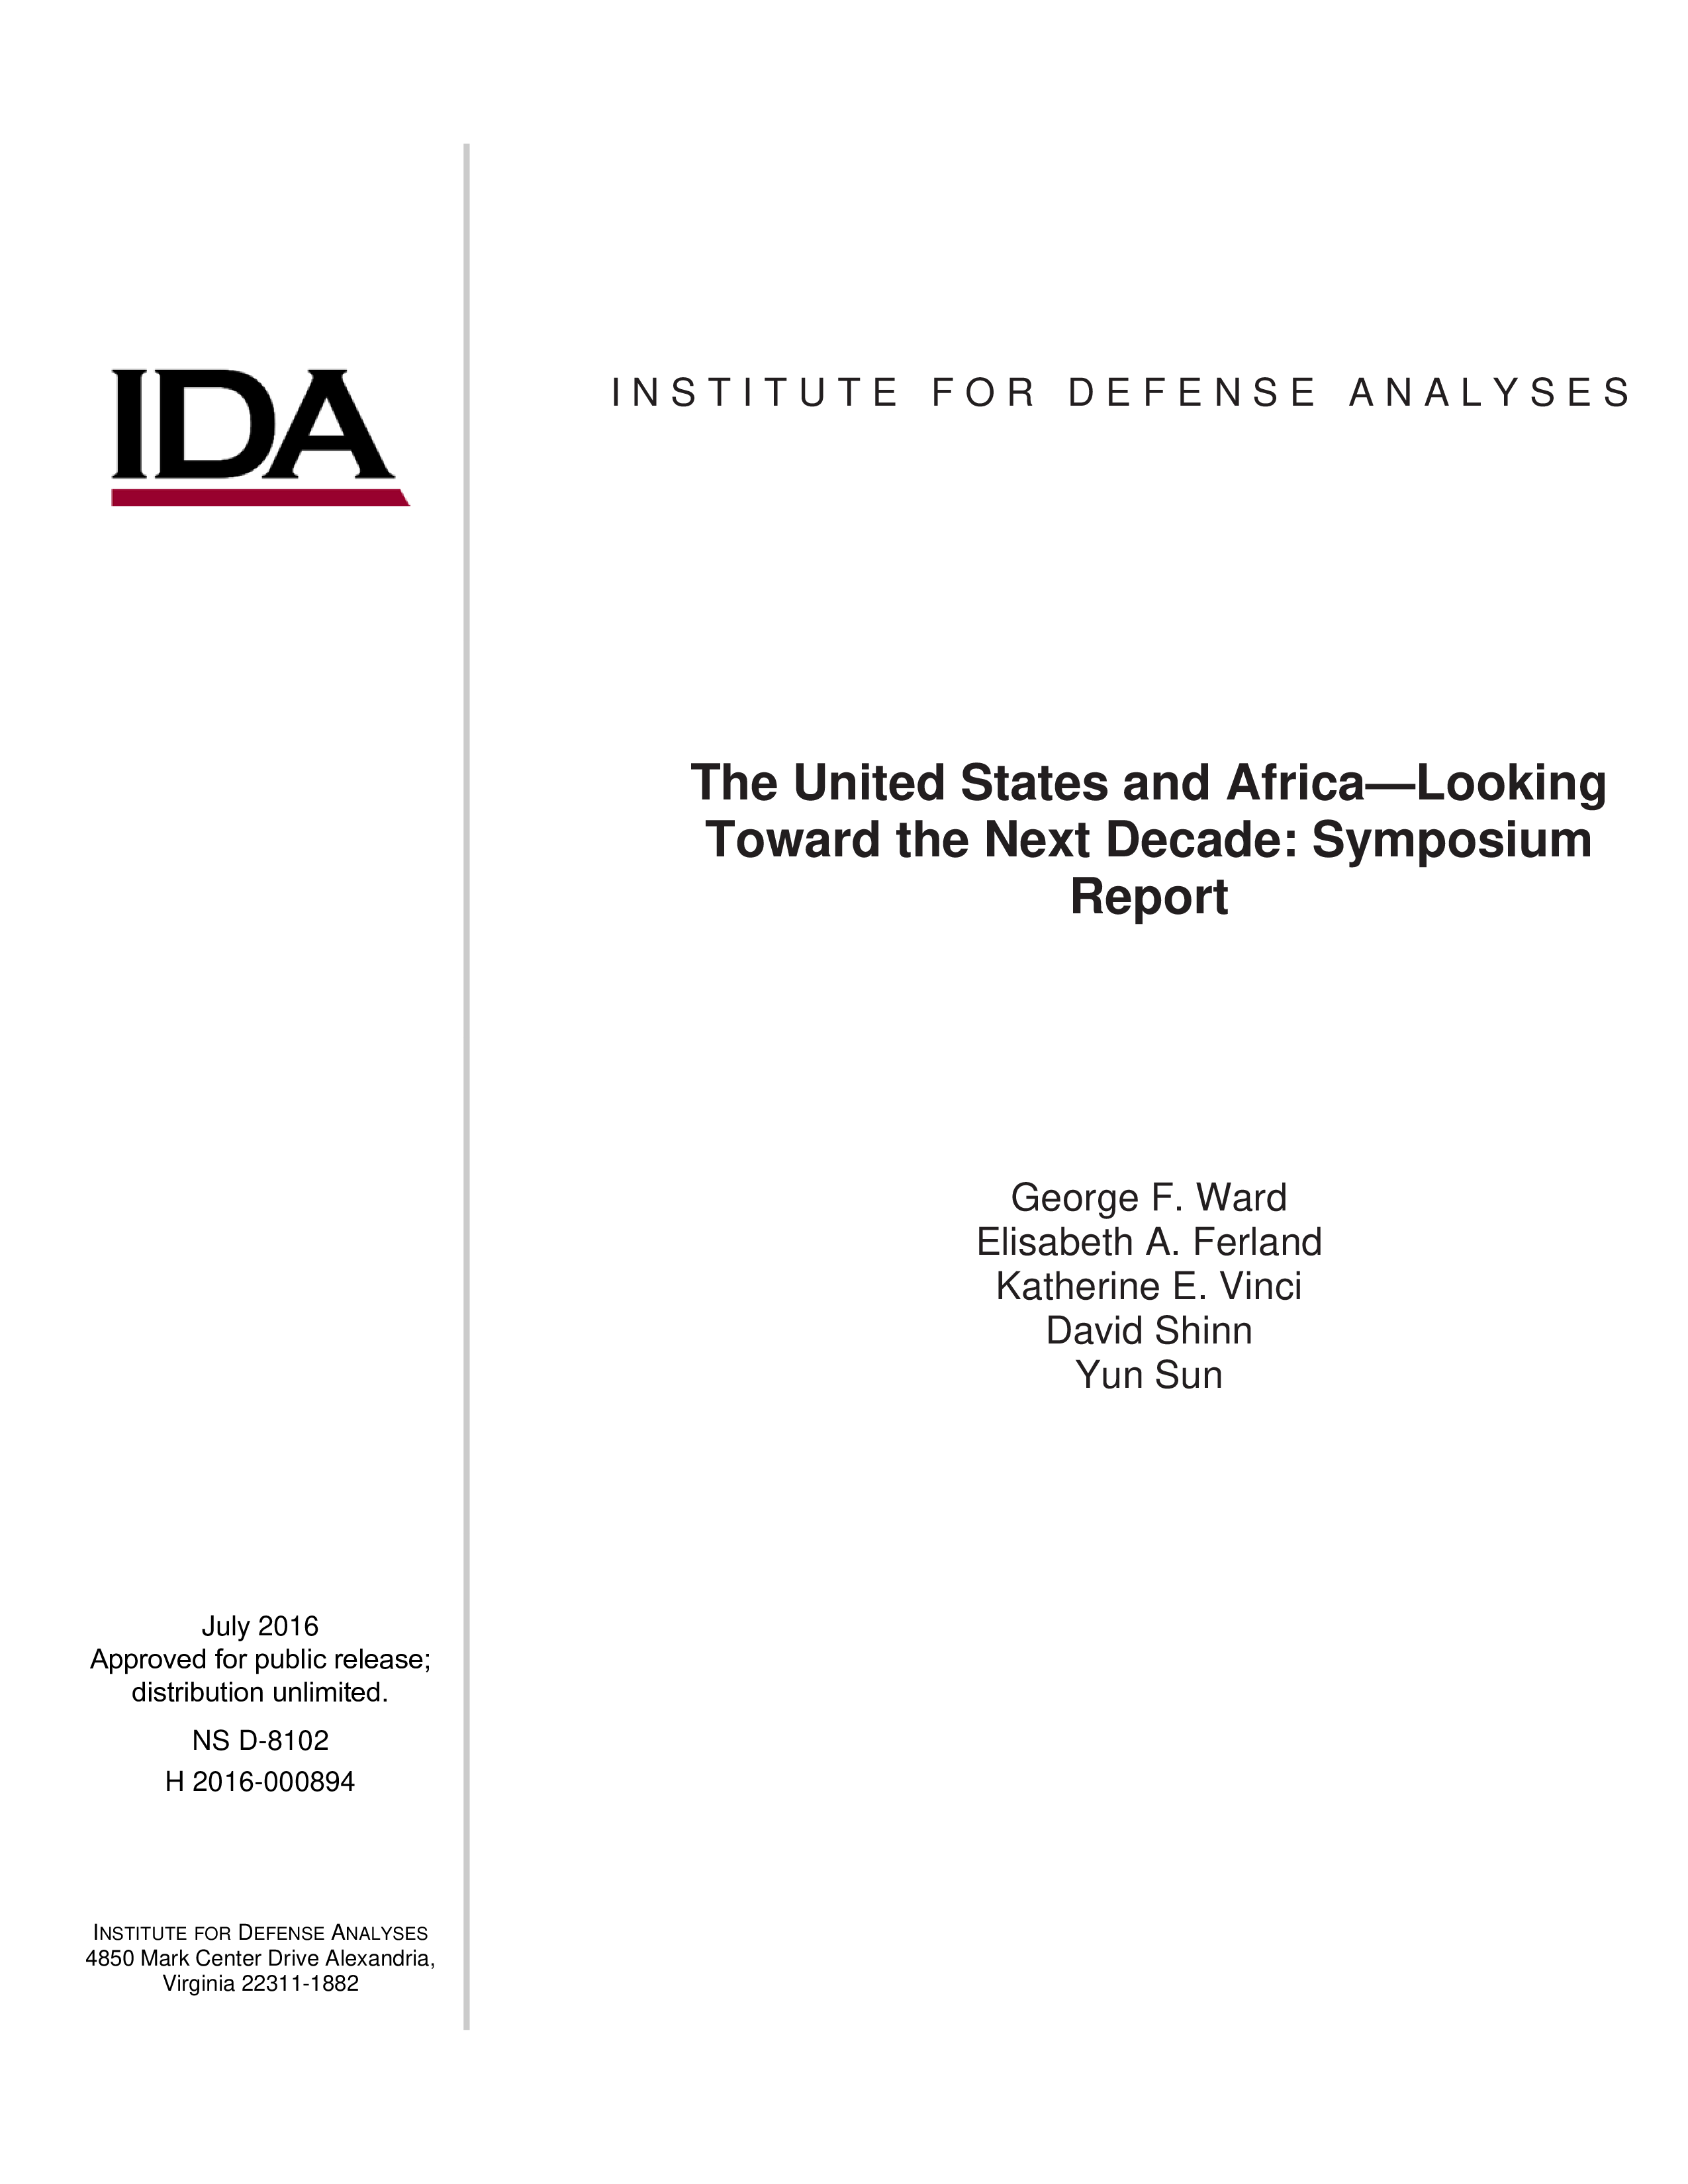 The United States and Africa—Looking Toward the Next Decade: Symposium Report